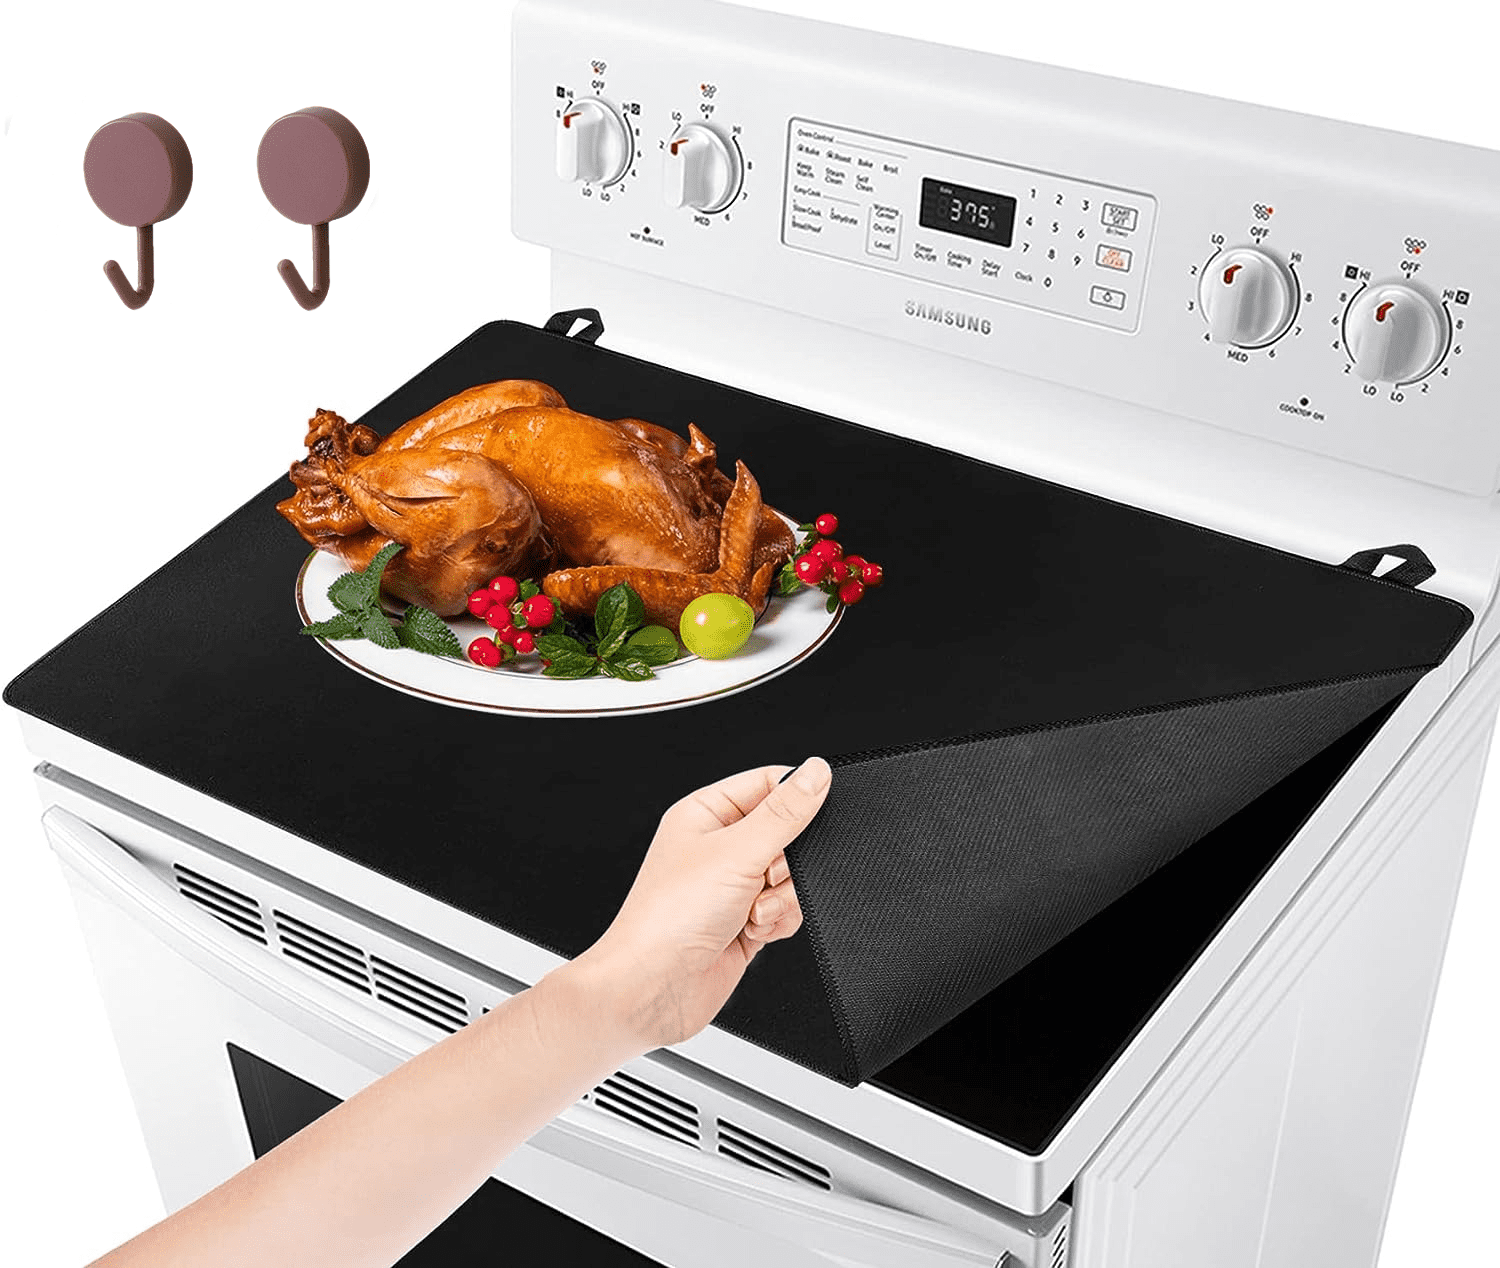 Stove Top Cover, 30.4 x 21.5 Electric Stove Cover Mat, Ceramic Glass  Stove Protector, Washable Rubber Stove Protector Keep Stove Clean, Black